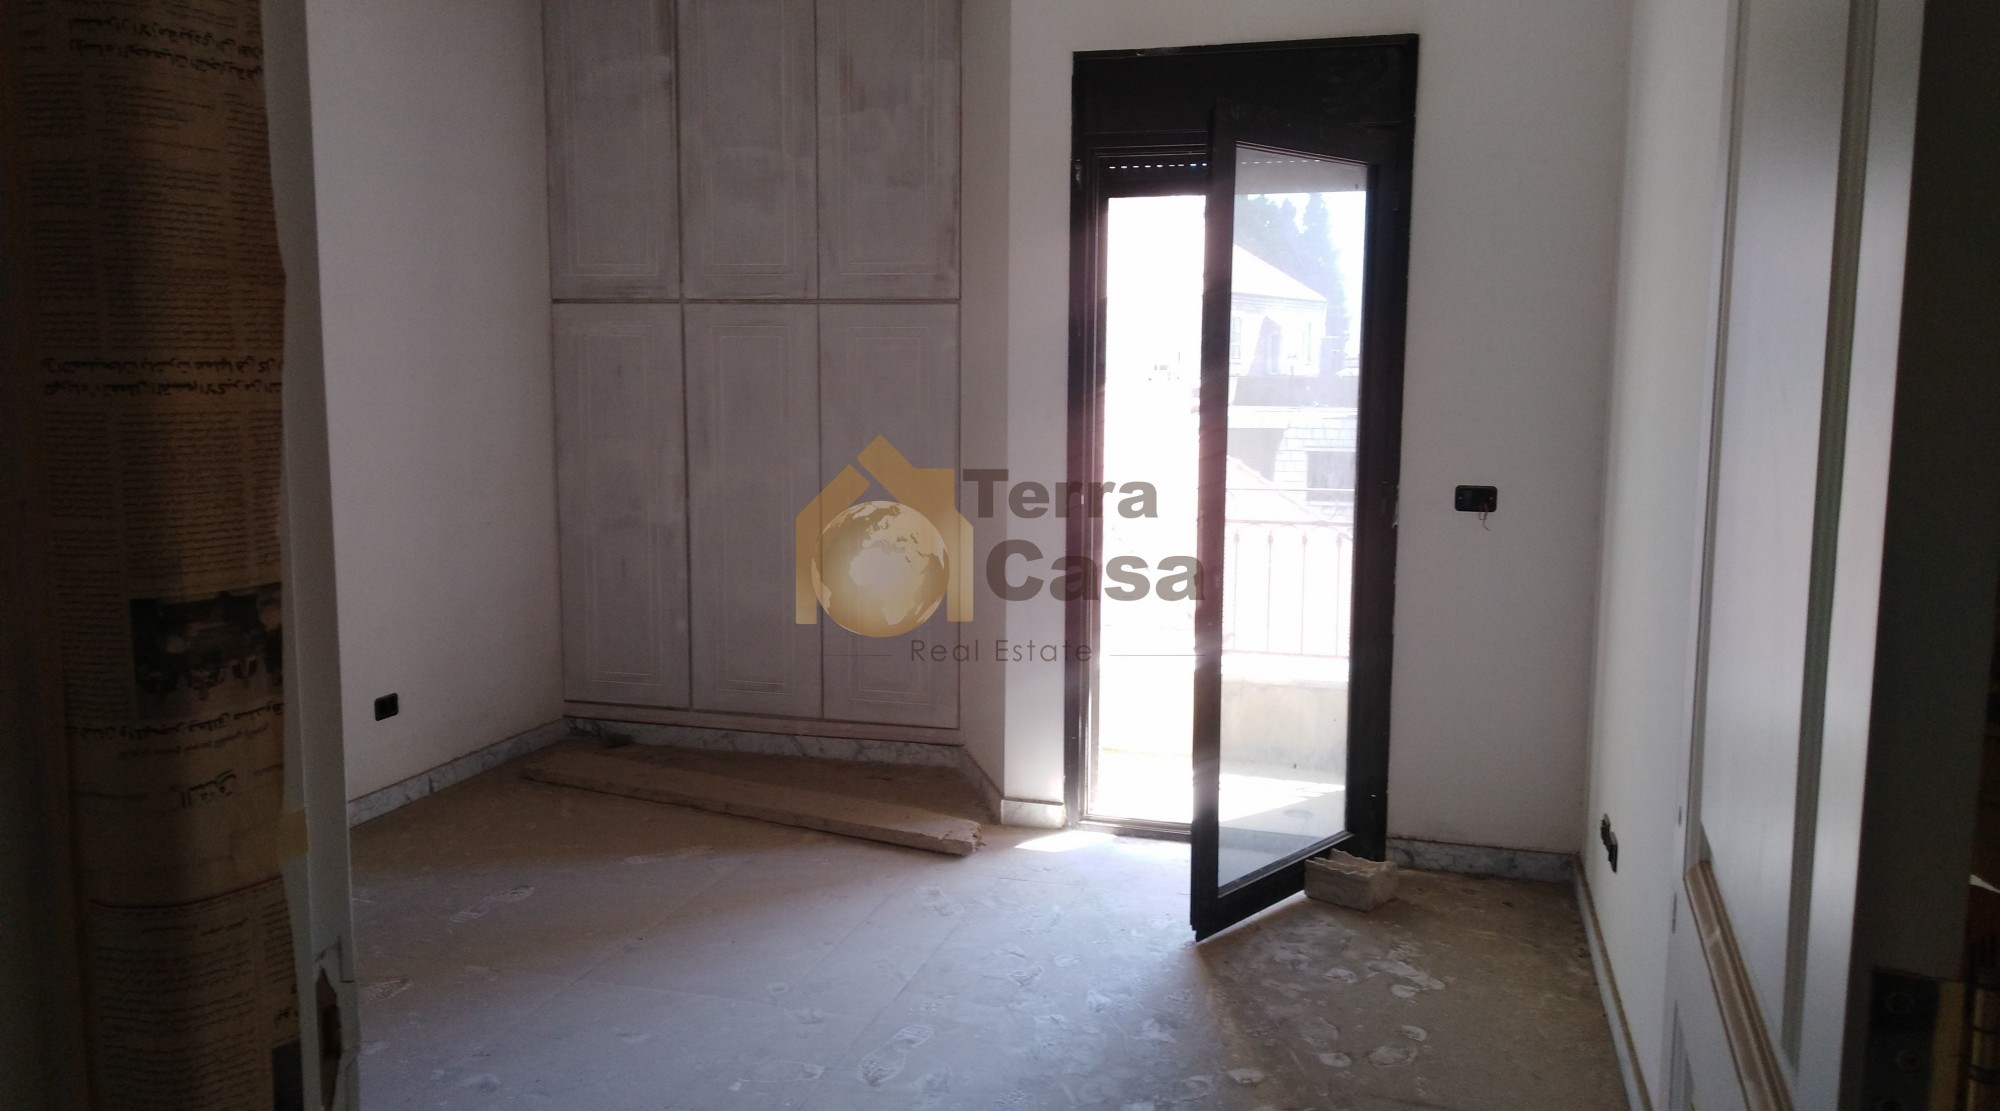 Duplex for sale in zahle boulevard uncompleted overlooking the city.